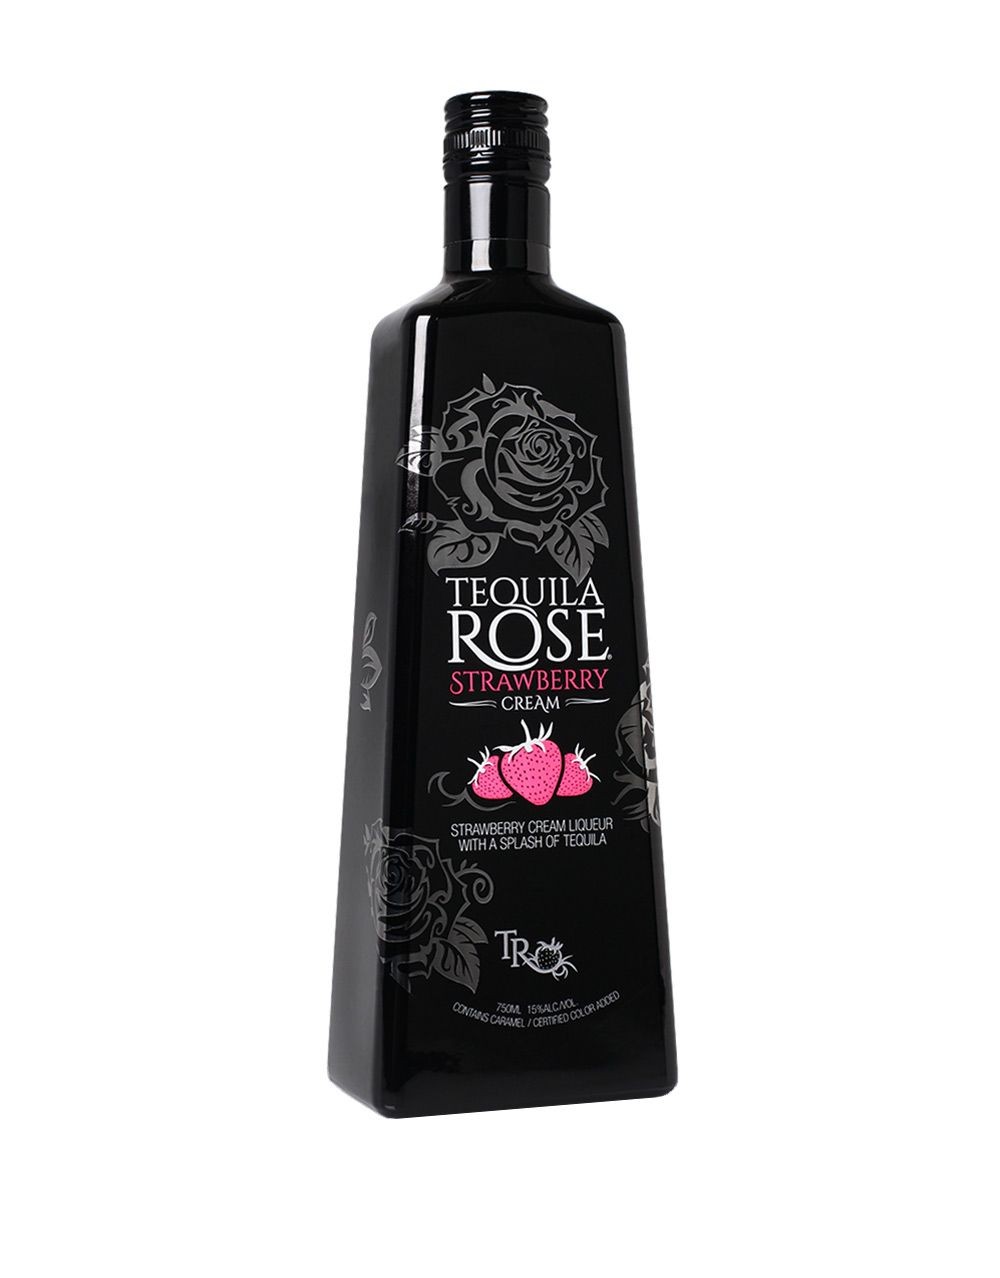 Tequila Rose | Buy Online or Send as a Gift | ReserveBar